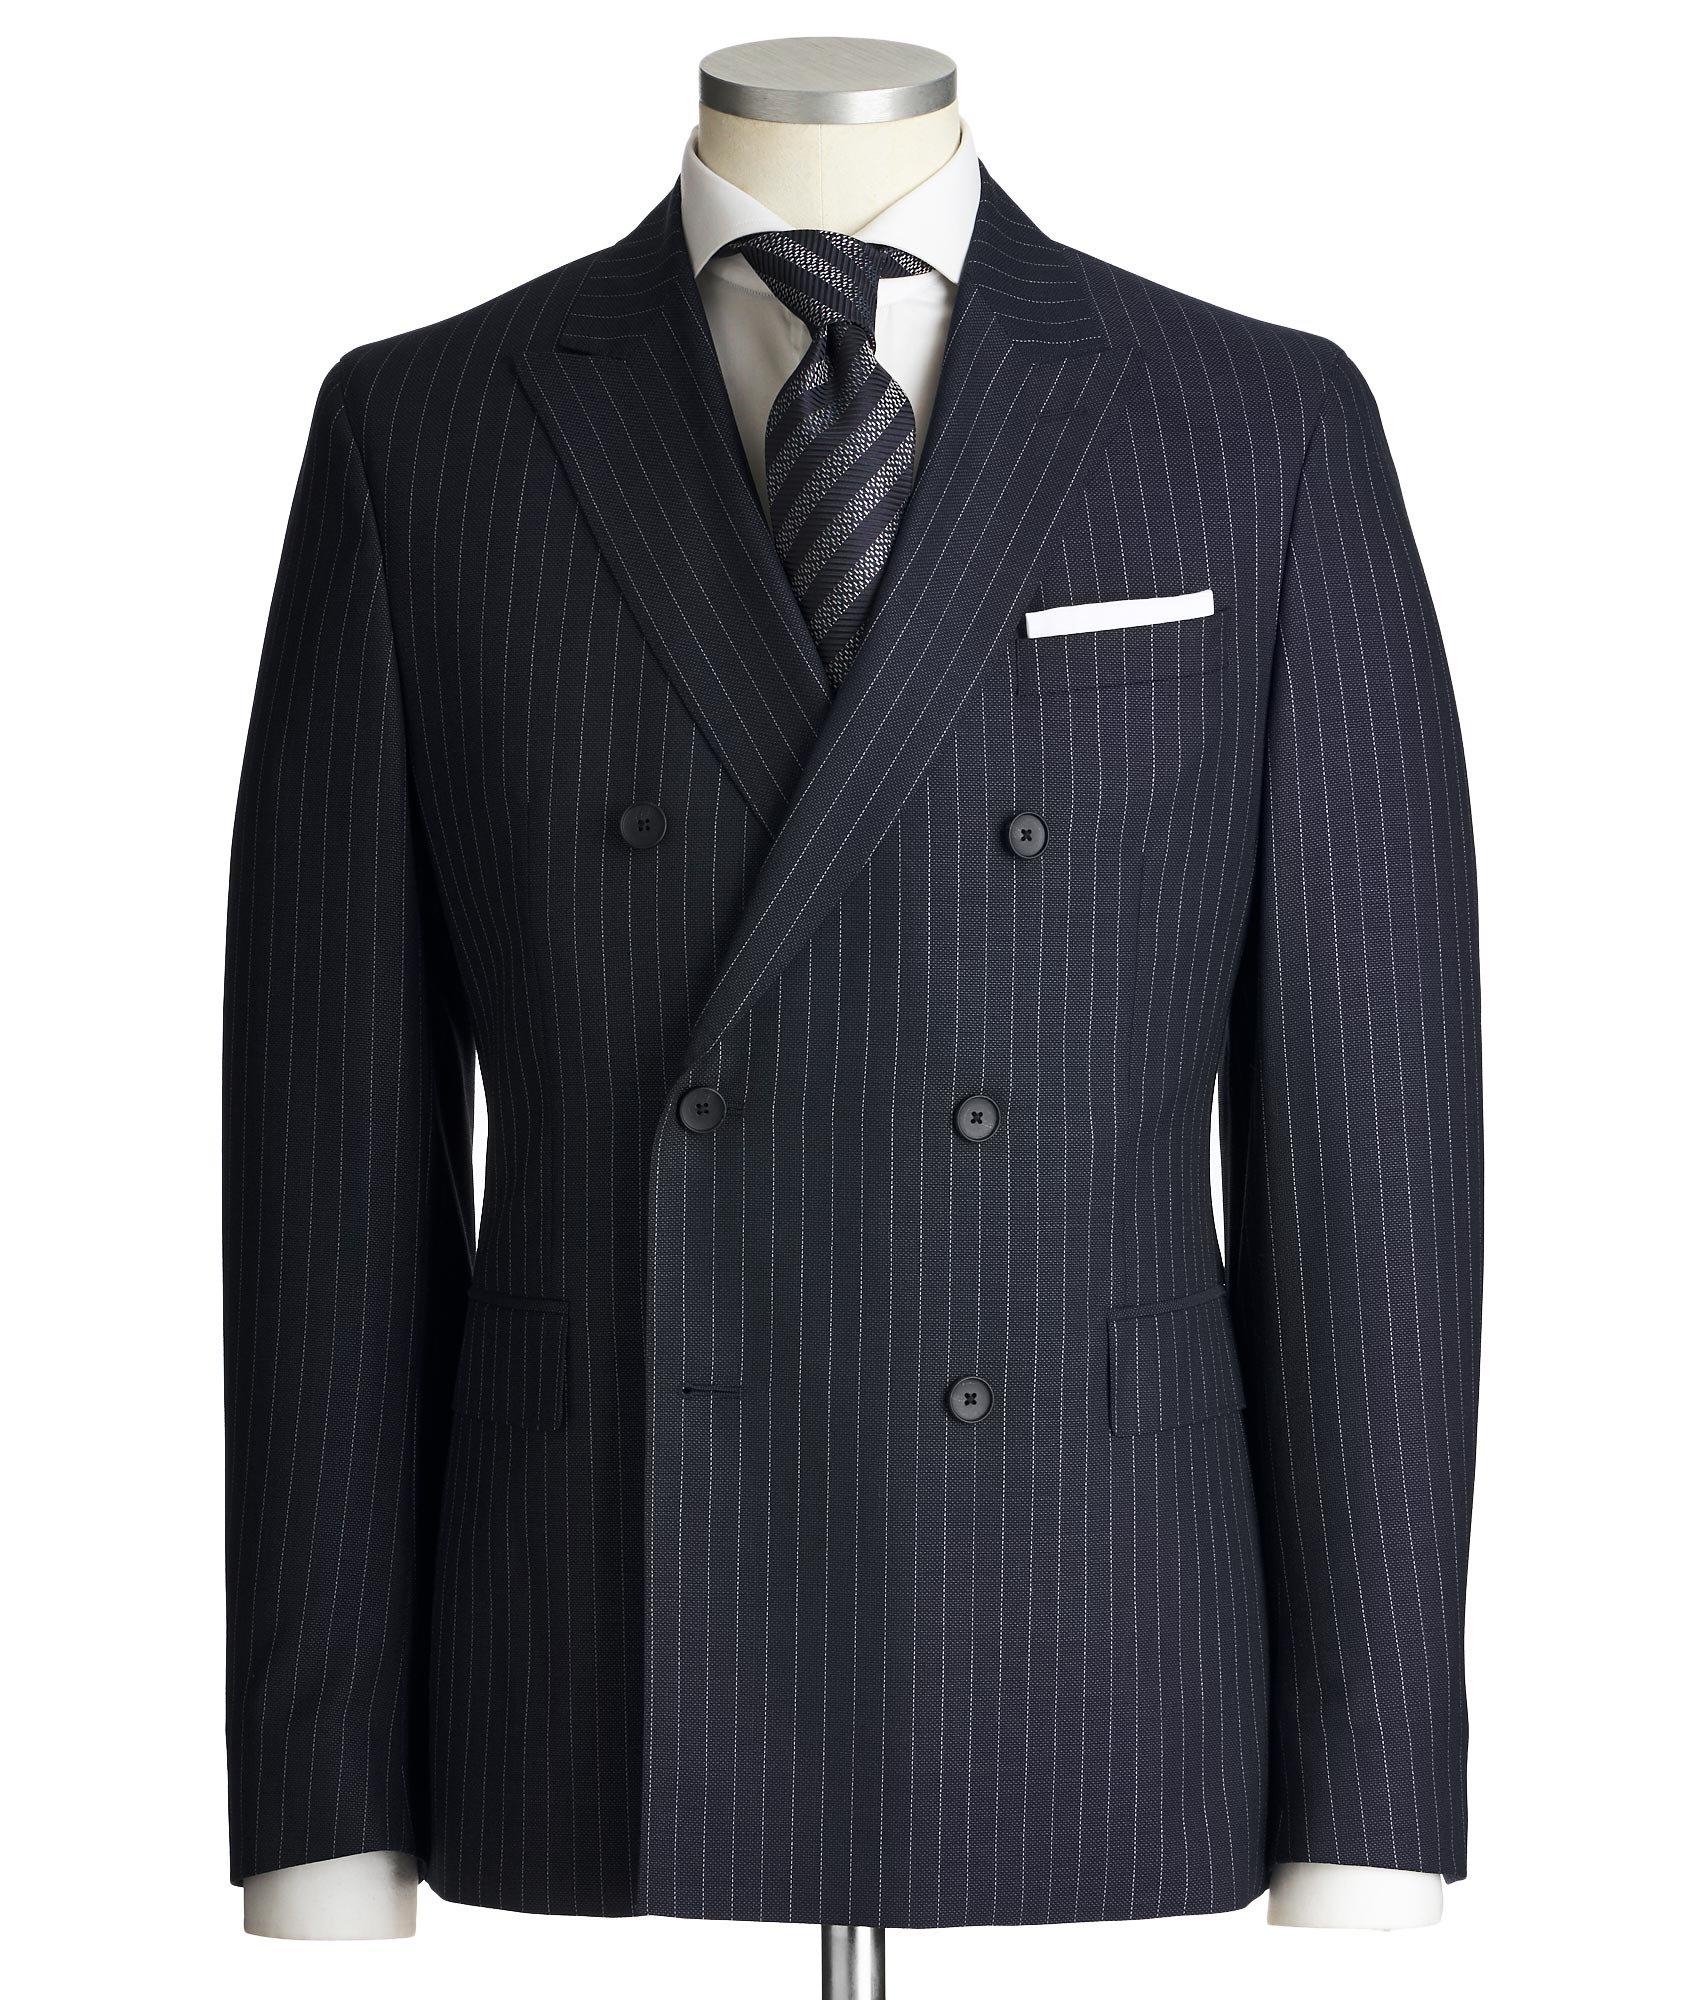 Namil3/Ben2 Double-Breasted Pinstriped Suit image 0